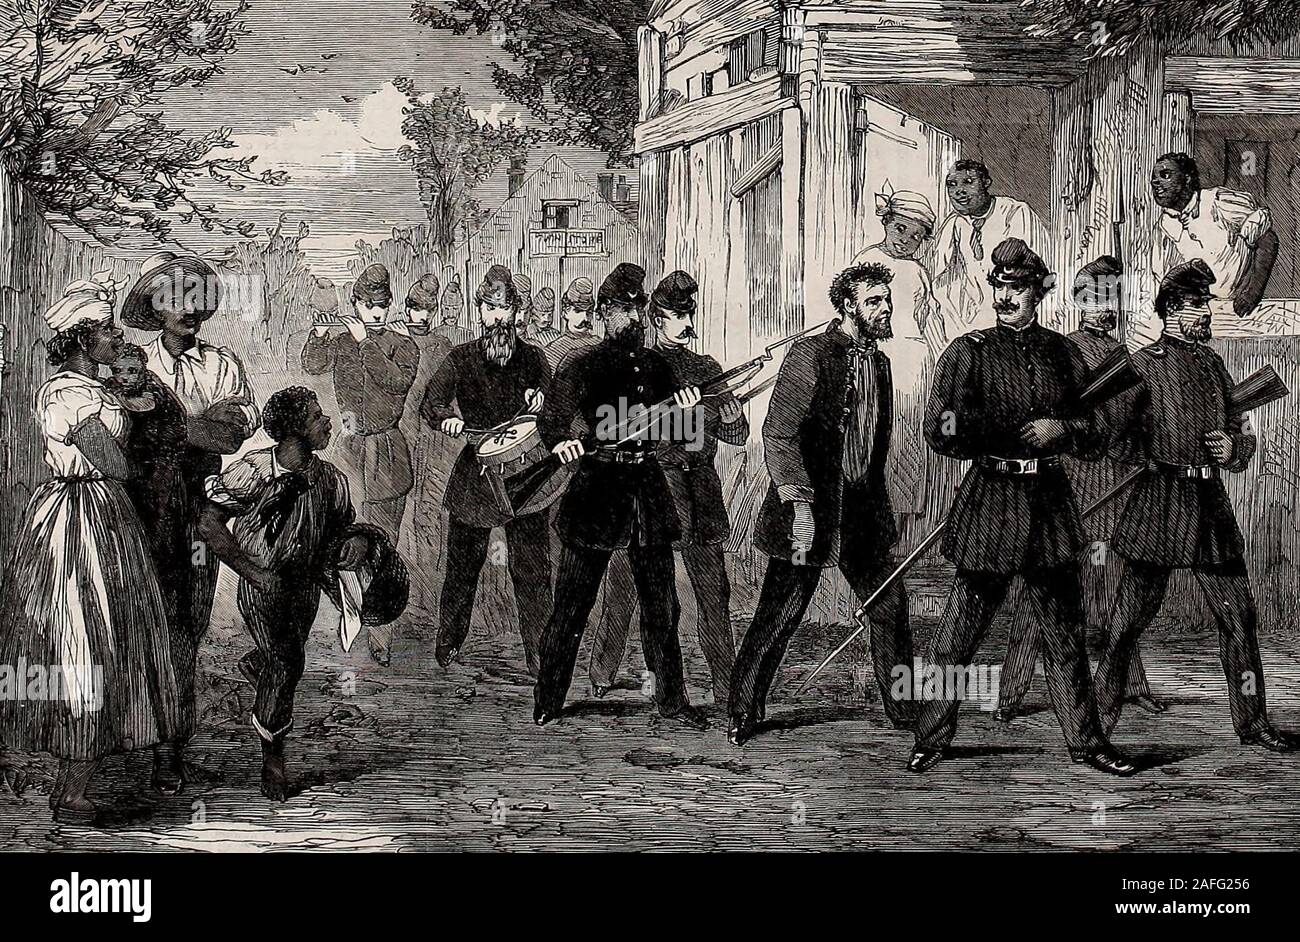 The Civil War in America - Drumming out a soldier of the Federal Army through the streets of Washington, DC - 1861 Stock Photo